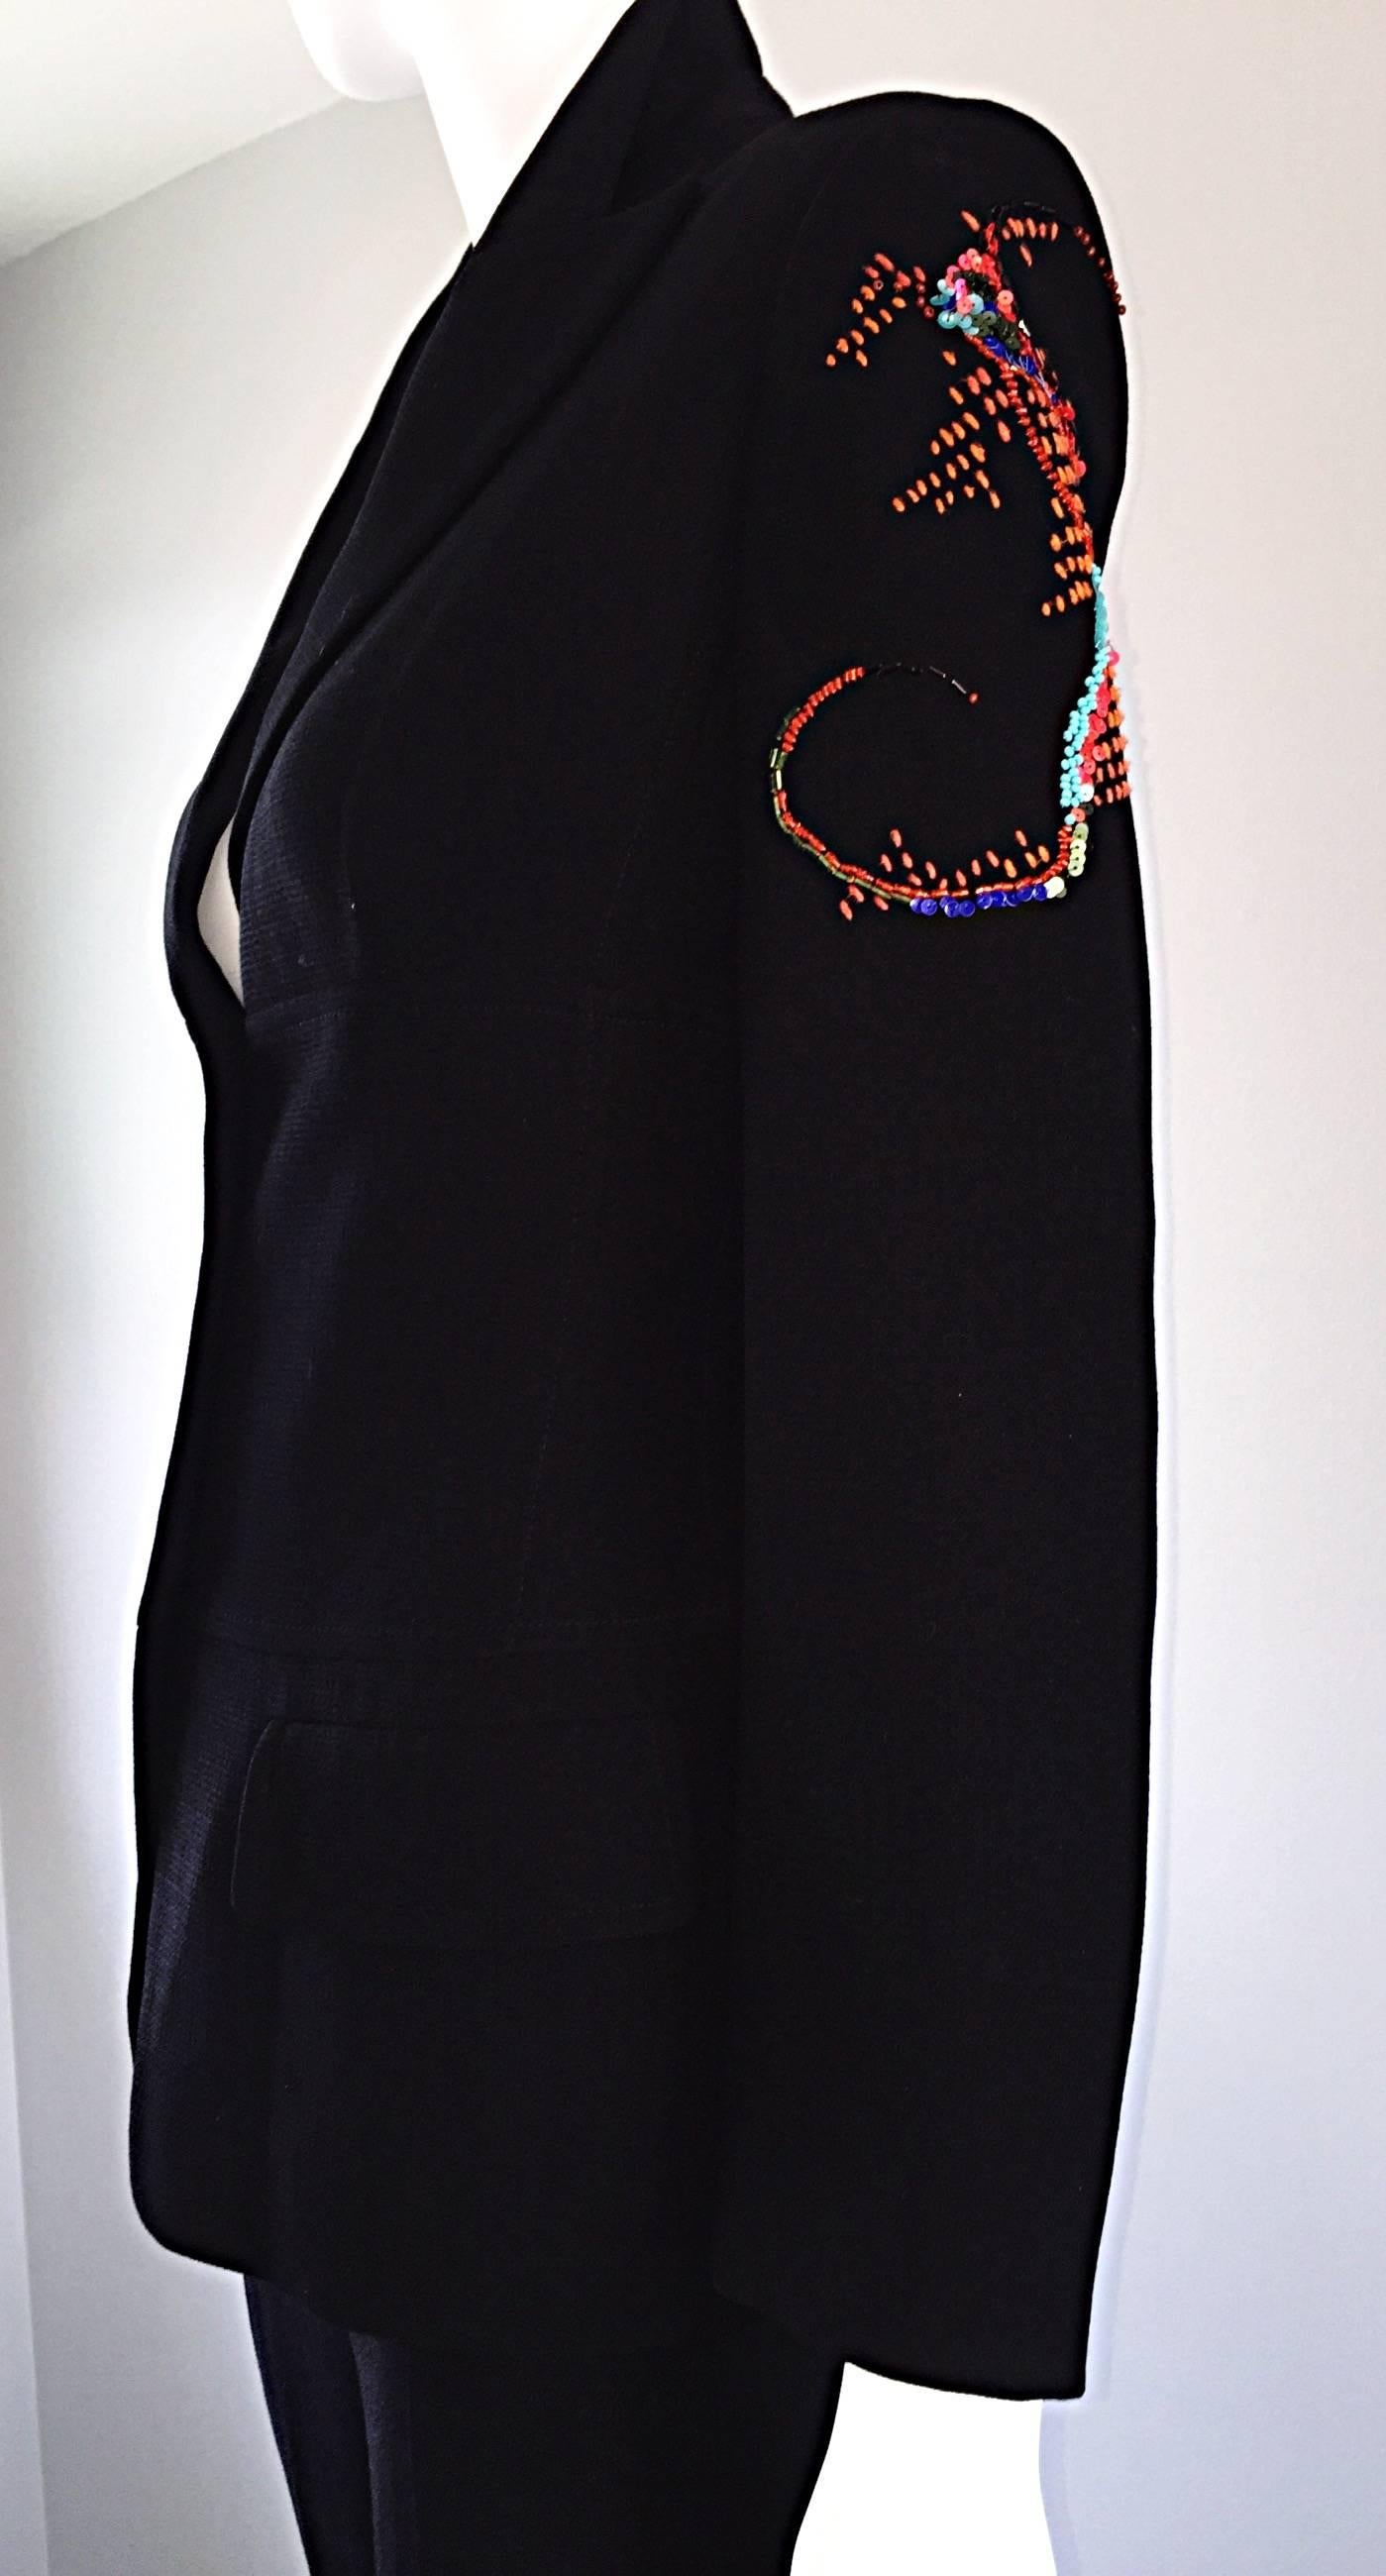 Spectacular Vintage Christian Lacroix Black Beaded Lizard Le Smoking Pant Suit In Excellent Condition For Sale In San Diego, CA